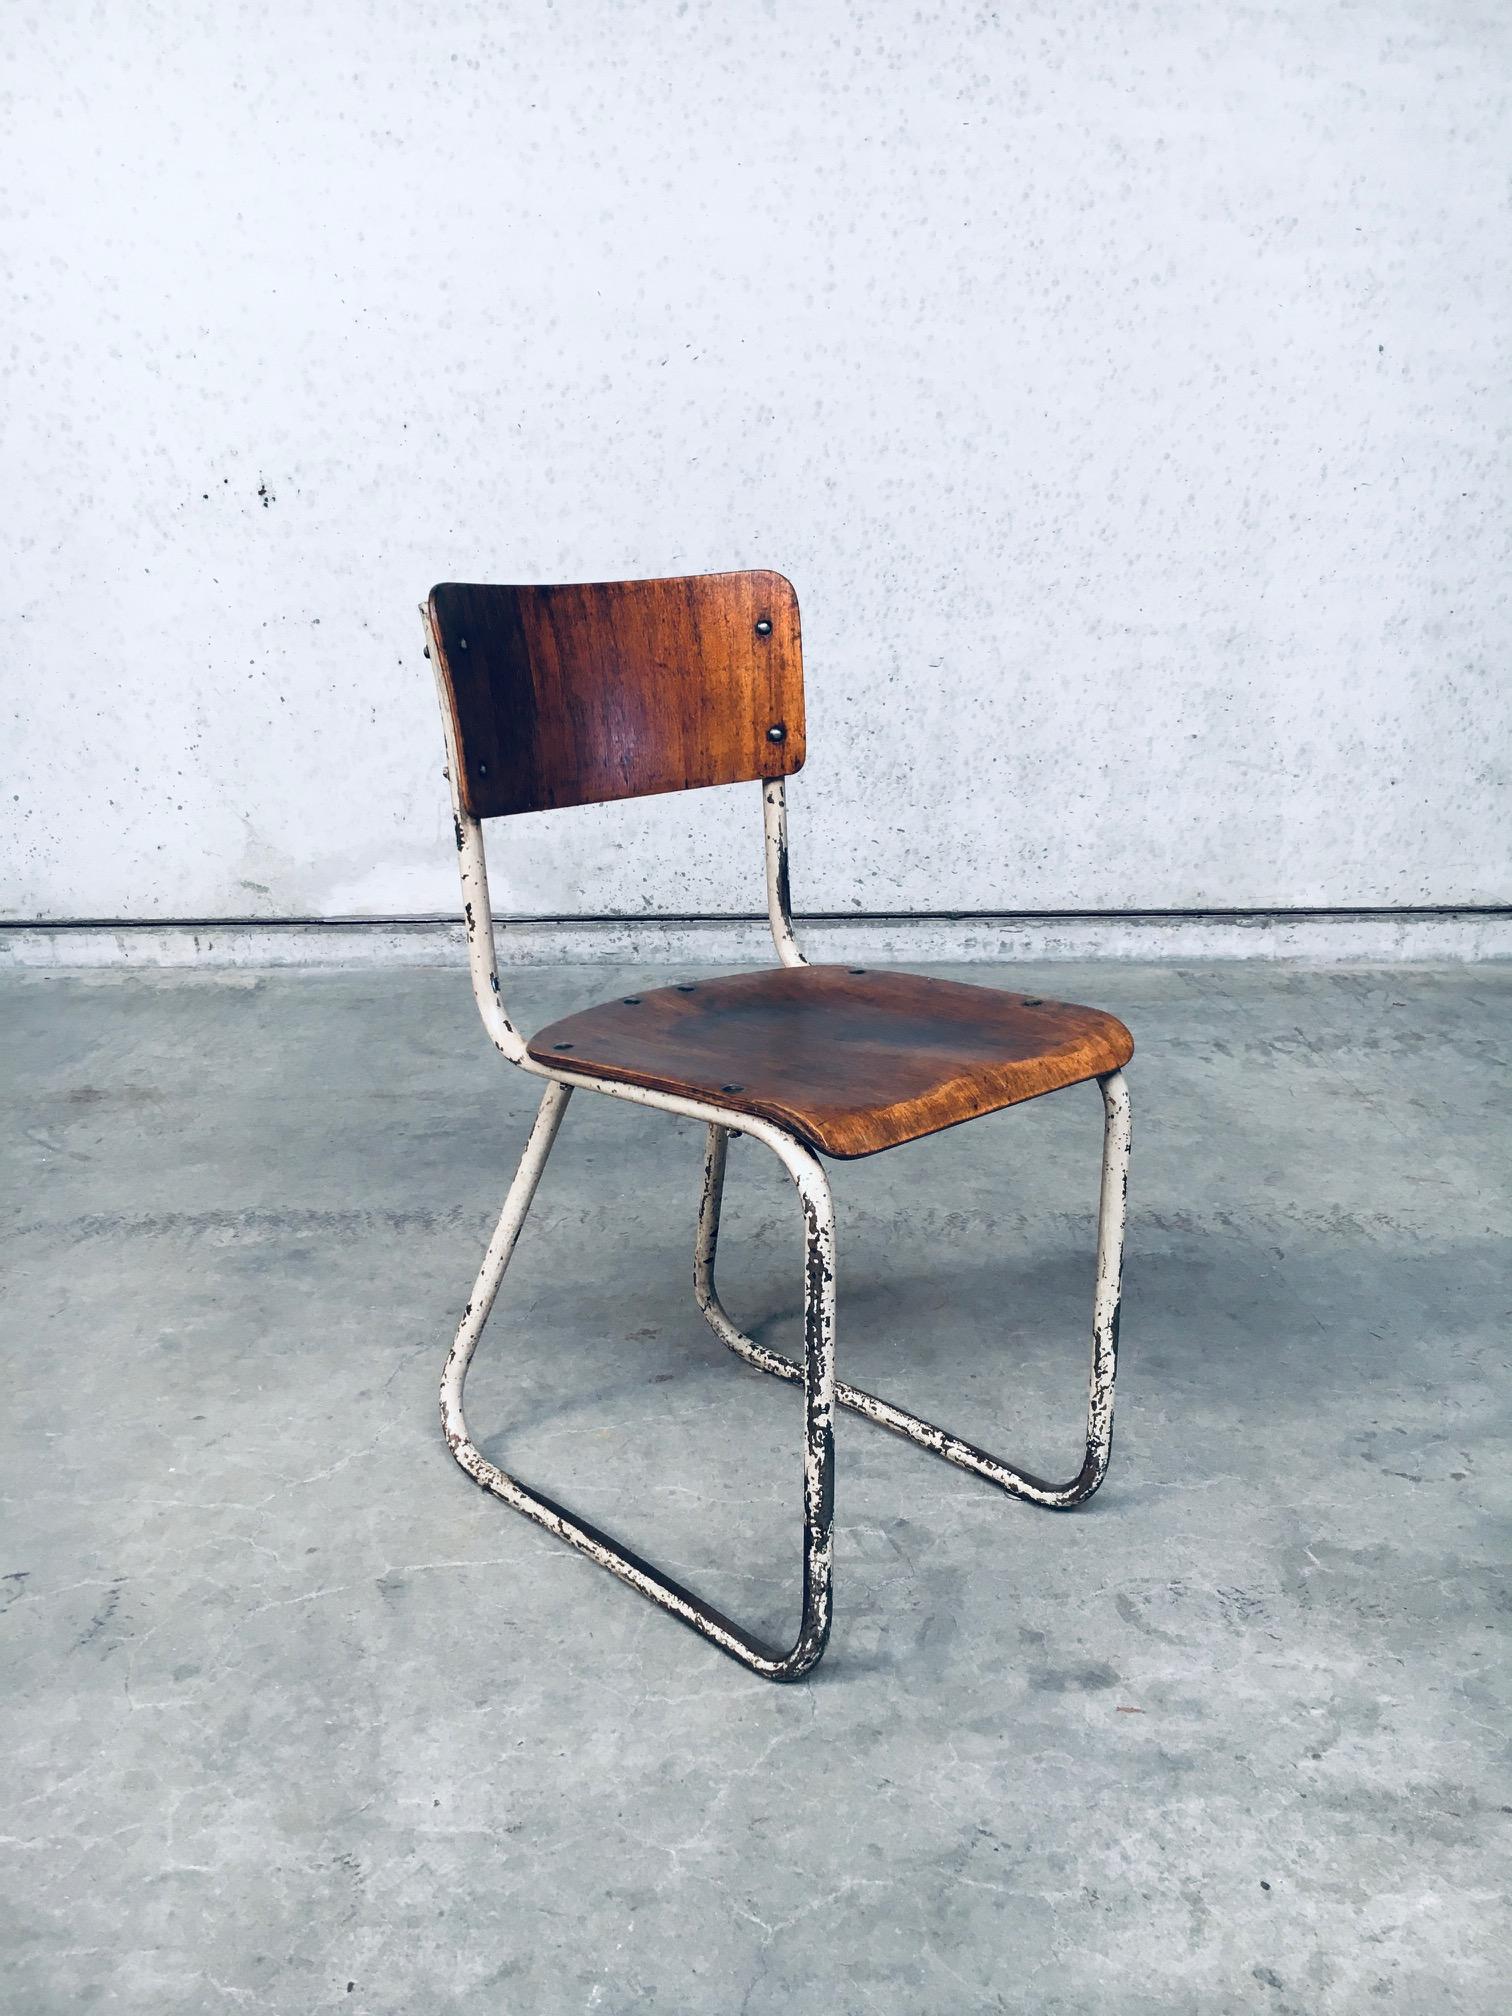 Vintage Bauhaus Industrial Design School Chair. Made in Germany 1940's period. Bend steel base with formed beech plywood seat and back rest. This chair has a very nice, well used patina. It has been refinished with keeping the original patina